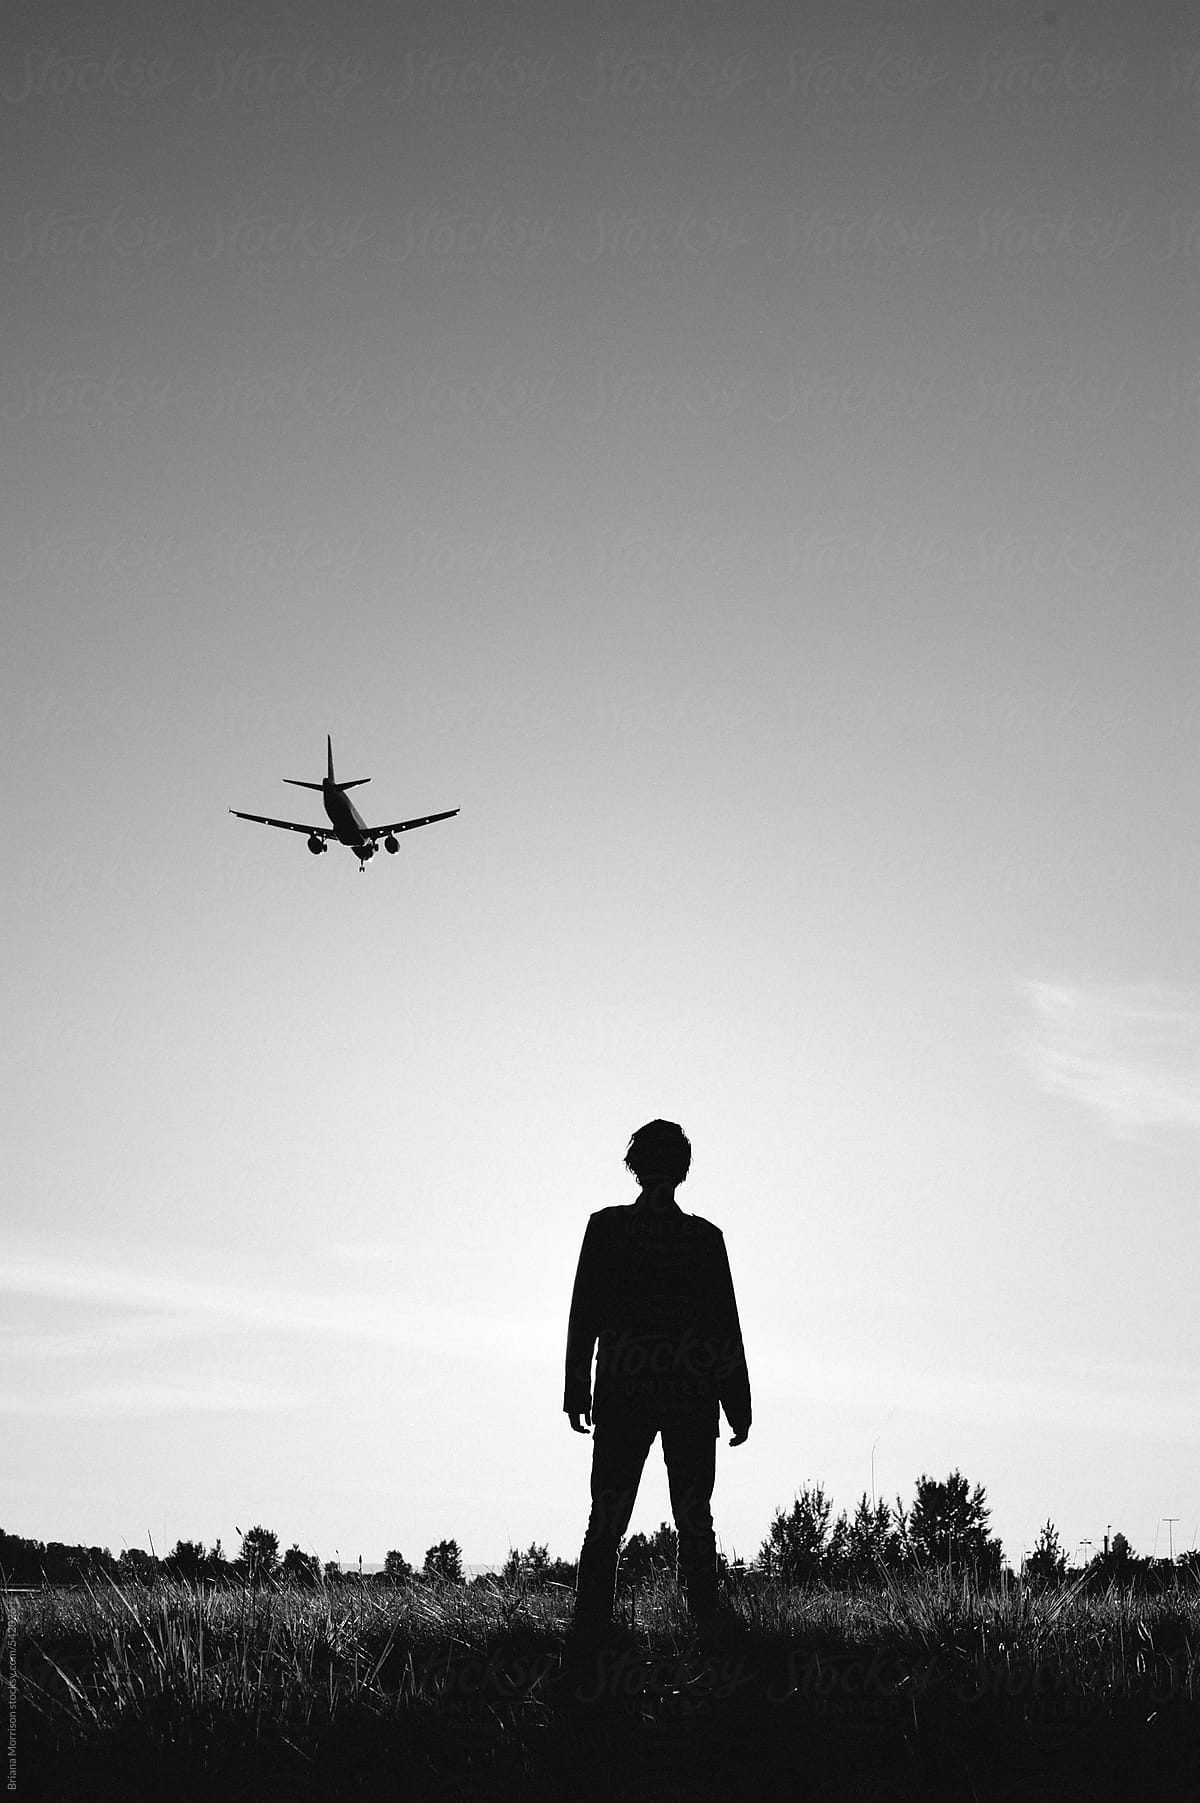 Silhouette of a Man Watching a Plane in the Sky in Black and White